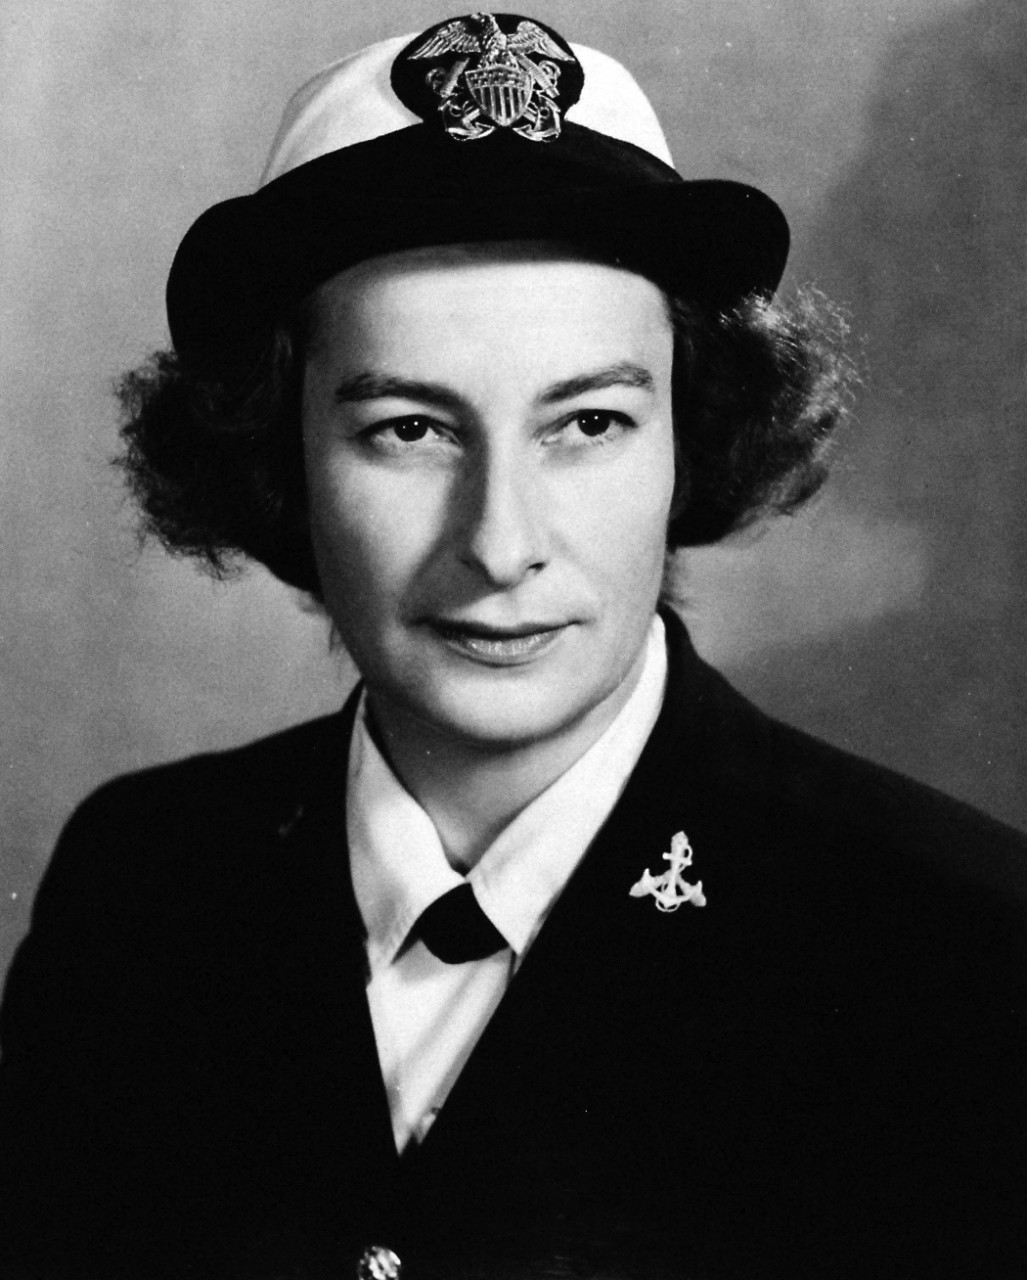 80-G-43277:  Service Dress Blue, June 1943.    Lieutenant Junior Grade Jenny Turnbull, USNR (W).    U.S. Navy photograph, now in the collections of the National Archives.  